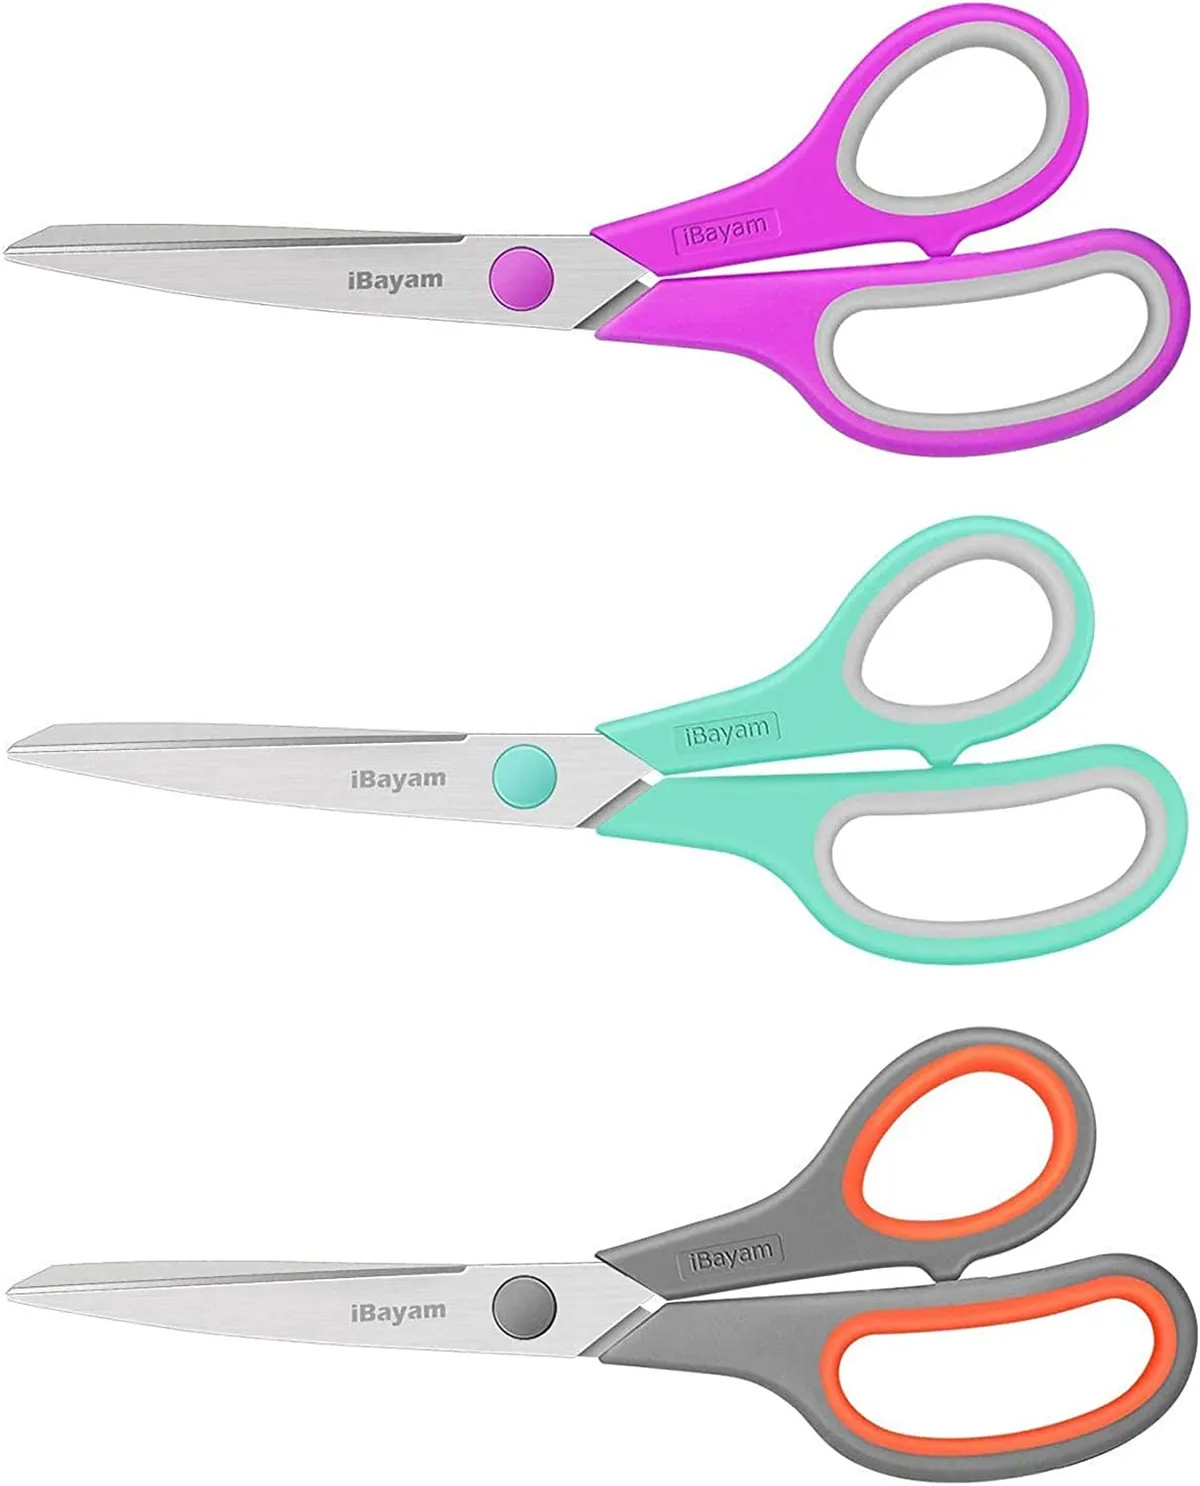 Leather Scissors. Small Sharp Stainless Steel Durable Blades - Effortless Cutting - Large Comfortable Shears for Crafting Sewing Clay Bead Kit